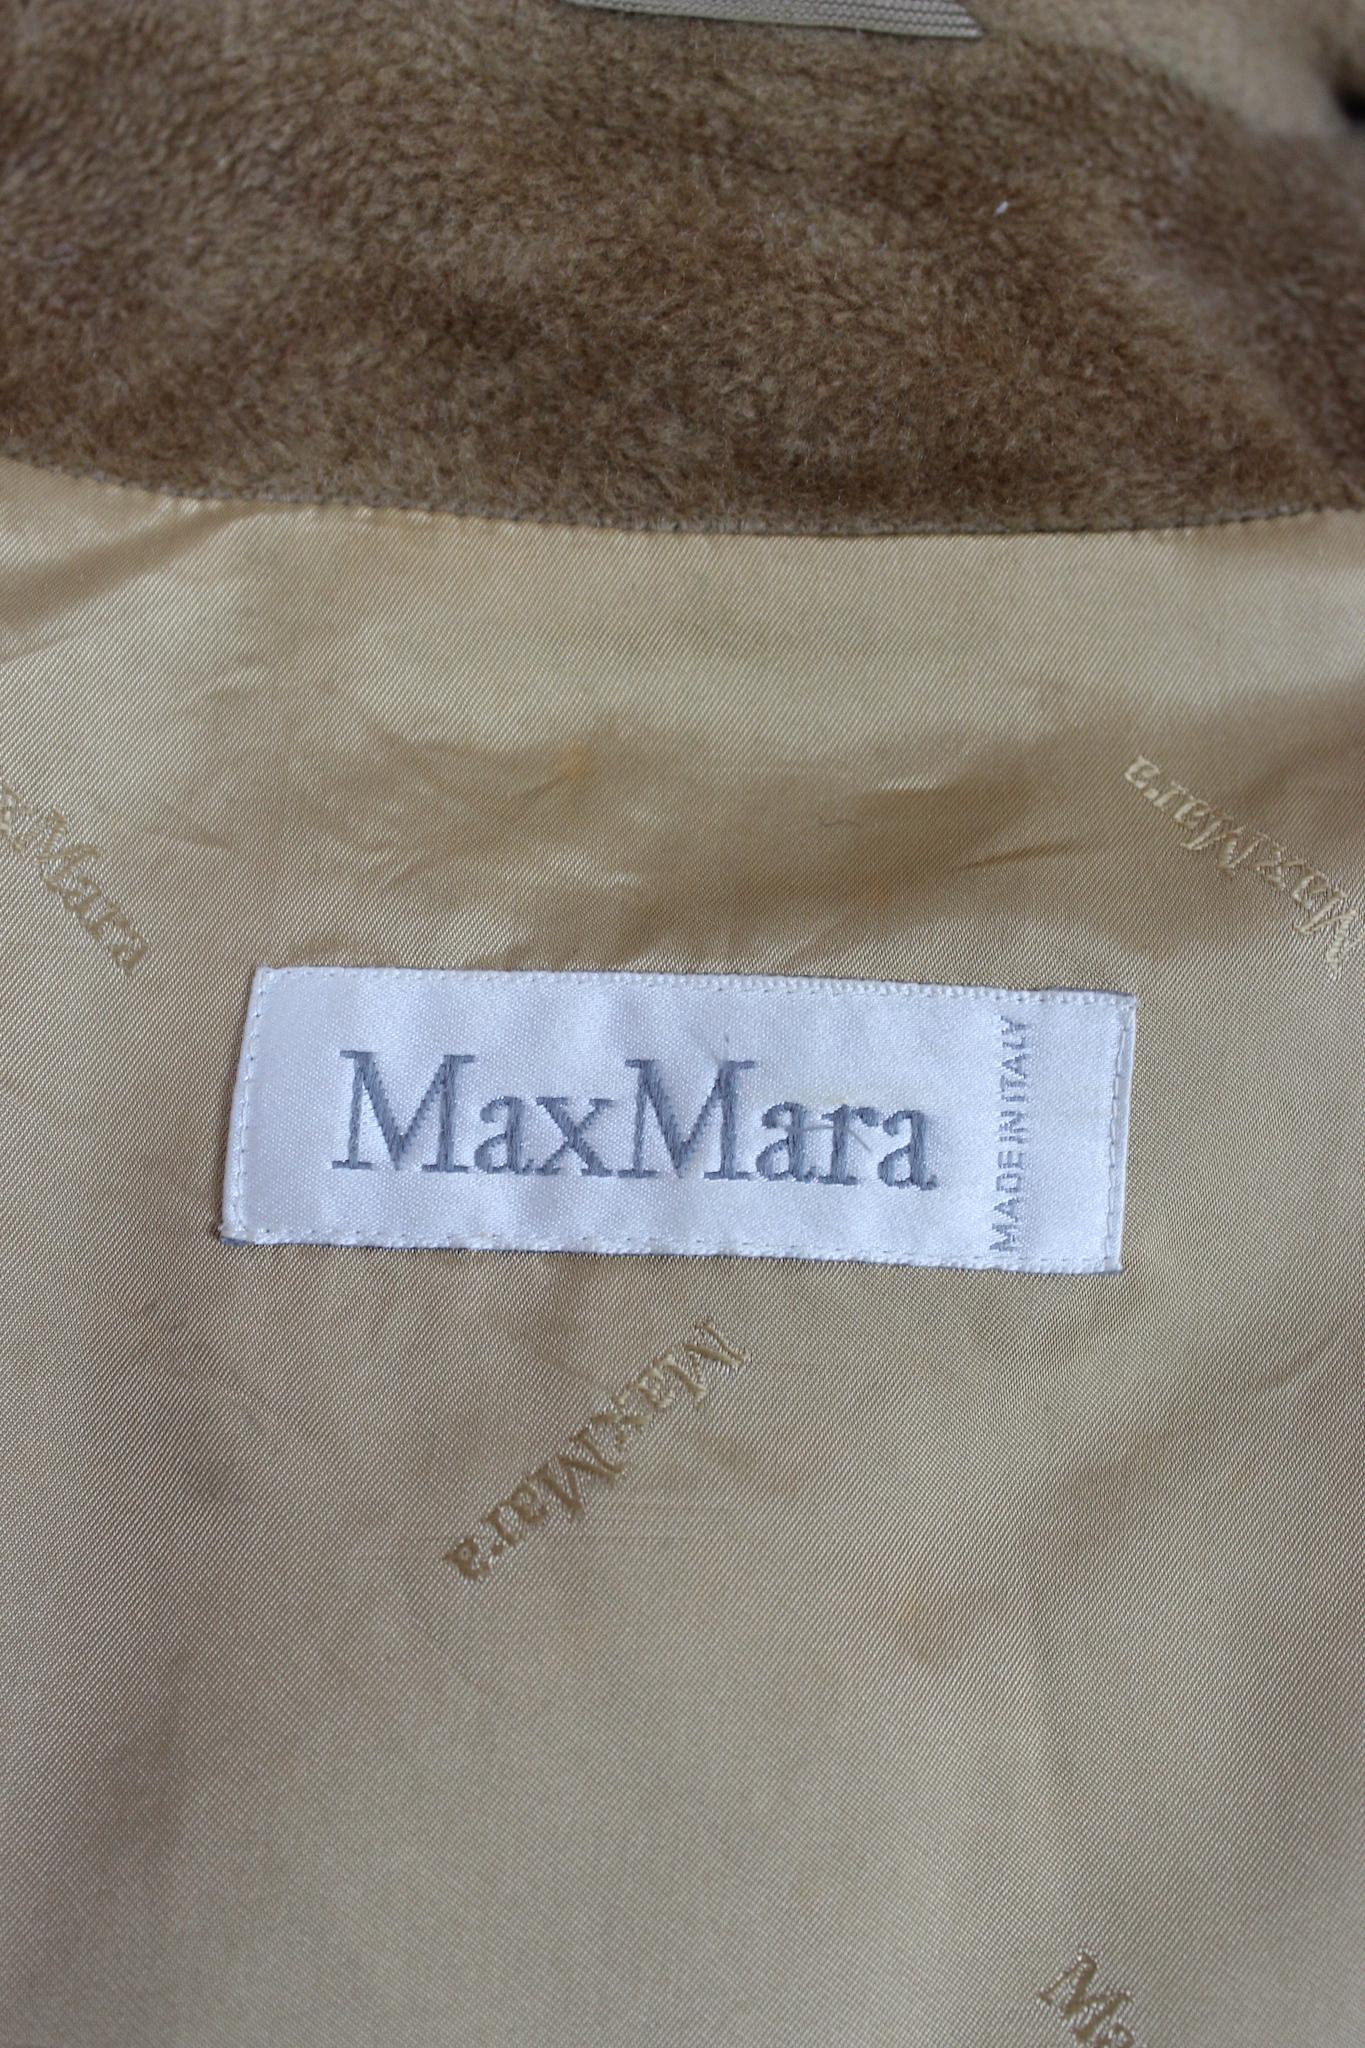 Max Mara vintage 90s maxi coat. Soft beige coat with enveloping collar, 100% wool fabric. Inside there is the lining in the shoulders and sleeves. Made in Italy. The general conditions are very good, there are some small imperfections and some small